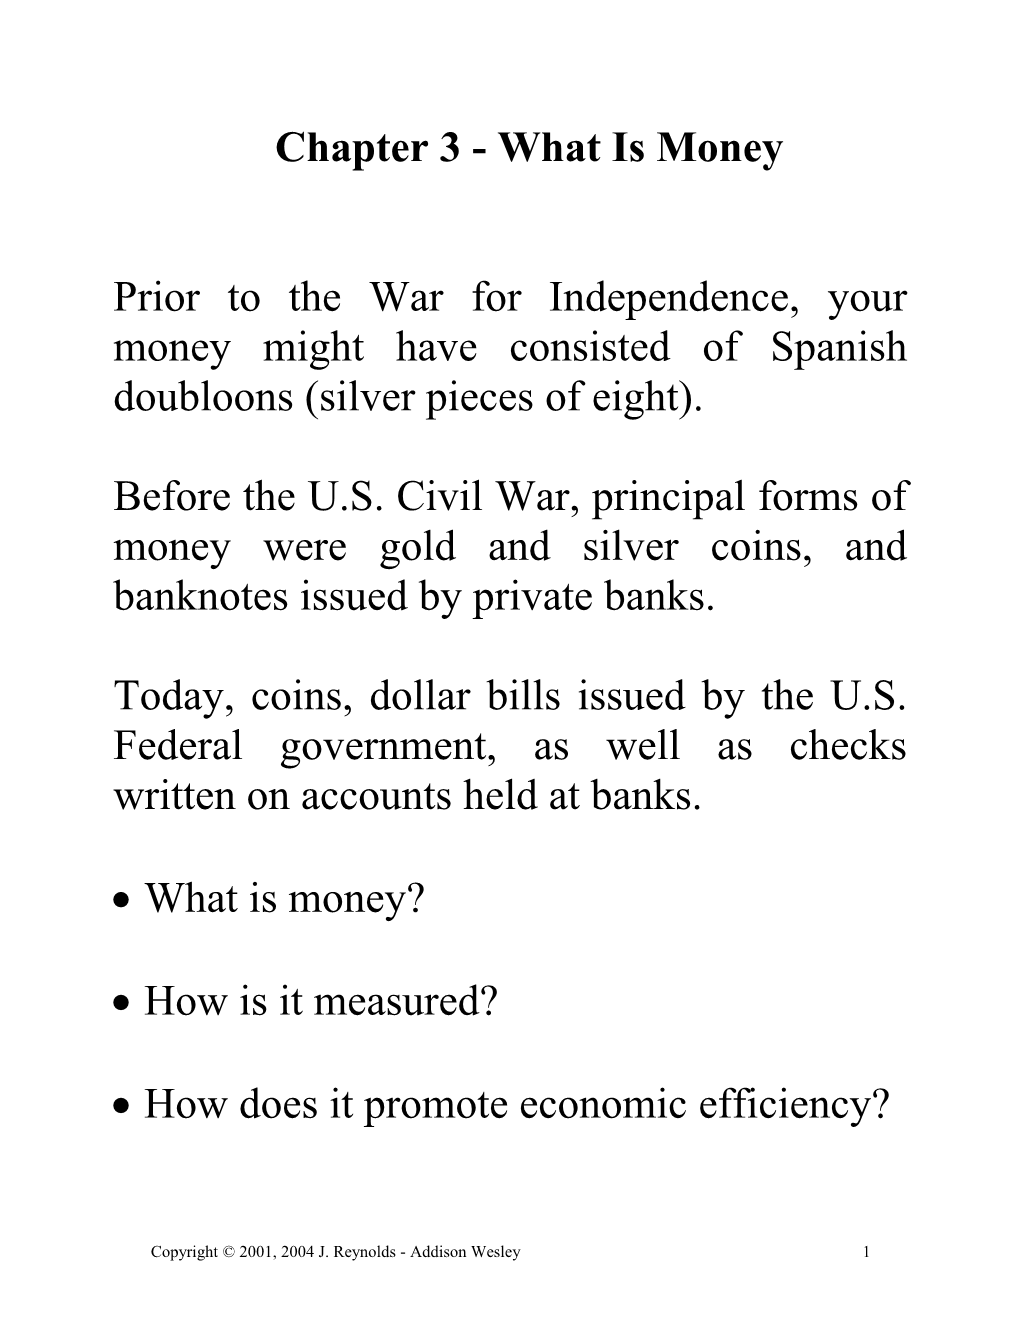 Chapter 1 - What Is Economics About